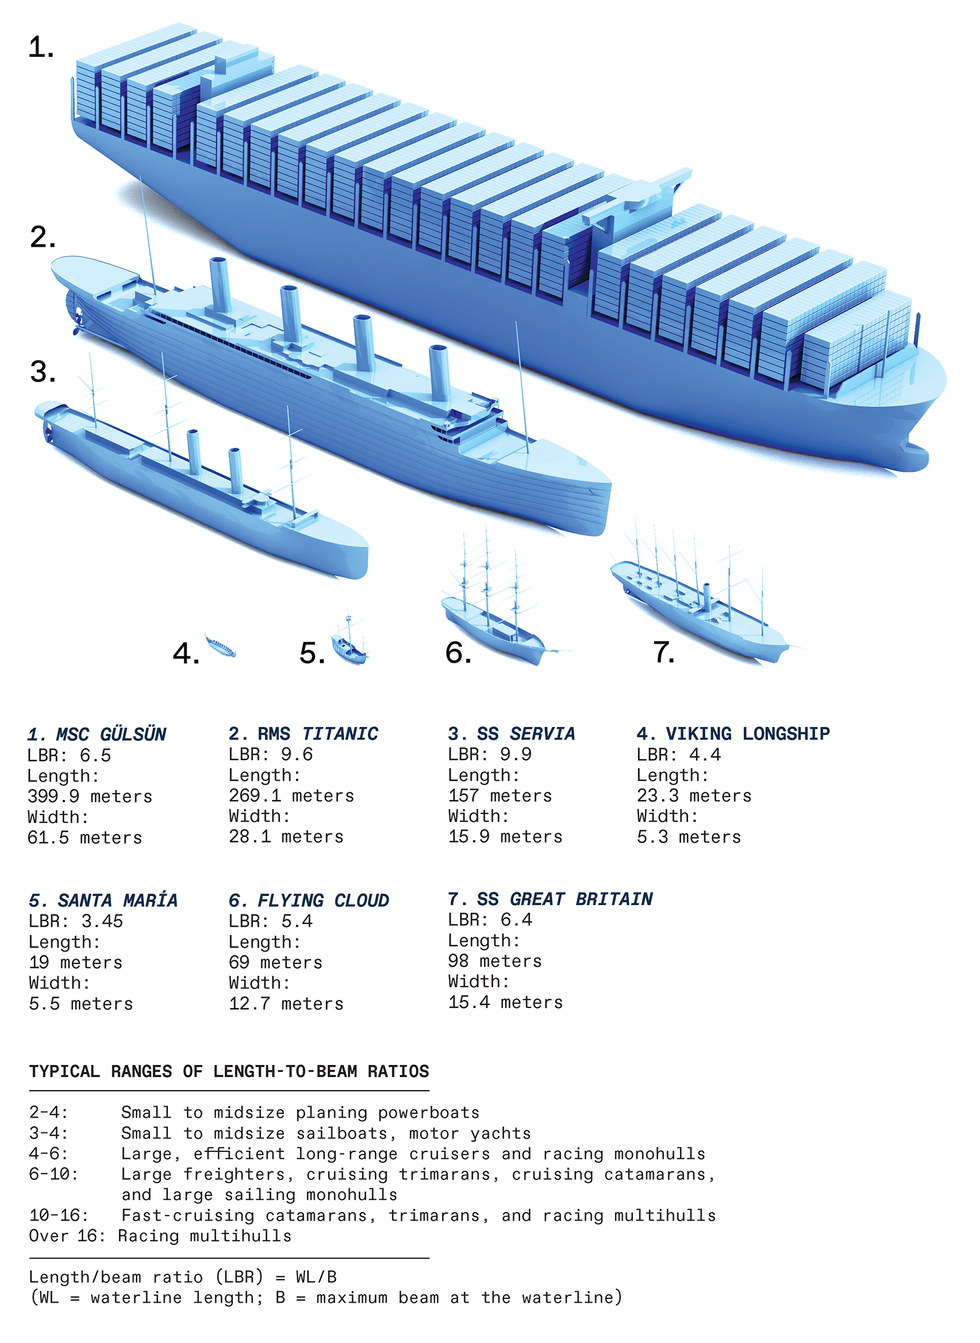 Illustration of ships and the associated data.